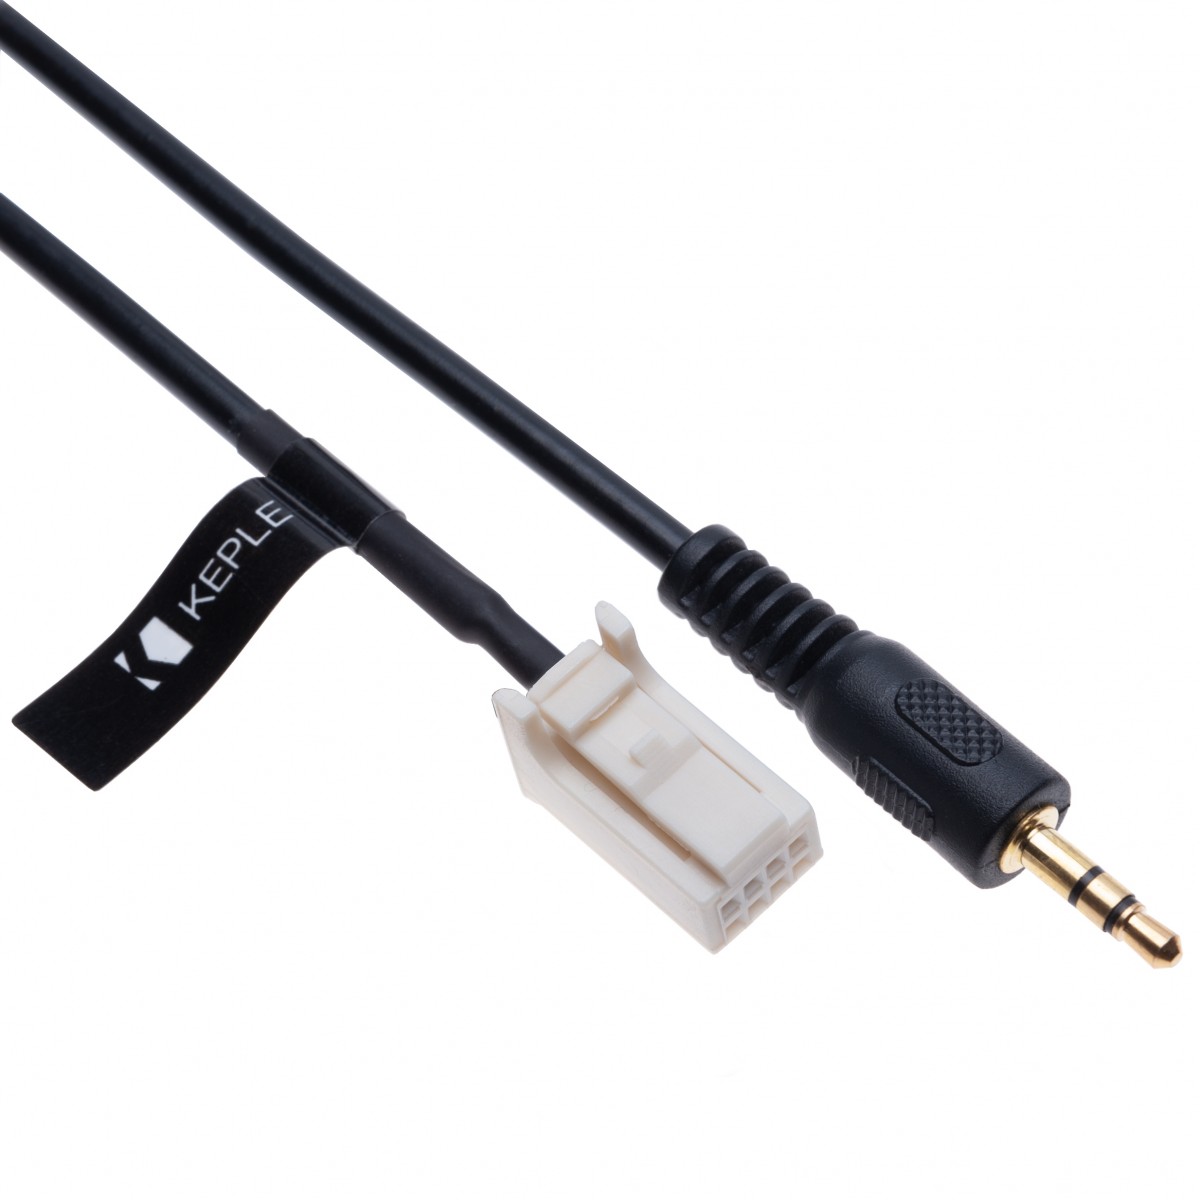 4.9 ft 8 pin AUX Input Audio Cable Adapter Compatible with Suzuki SX4 Grand Vitara Swift Jimny Clarion car Radio and Subaru BRZ Forester Outback Legacy Impreza